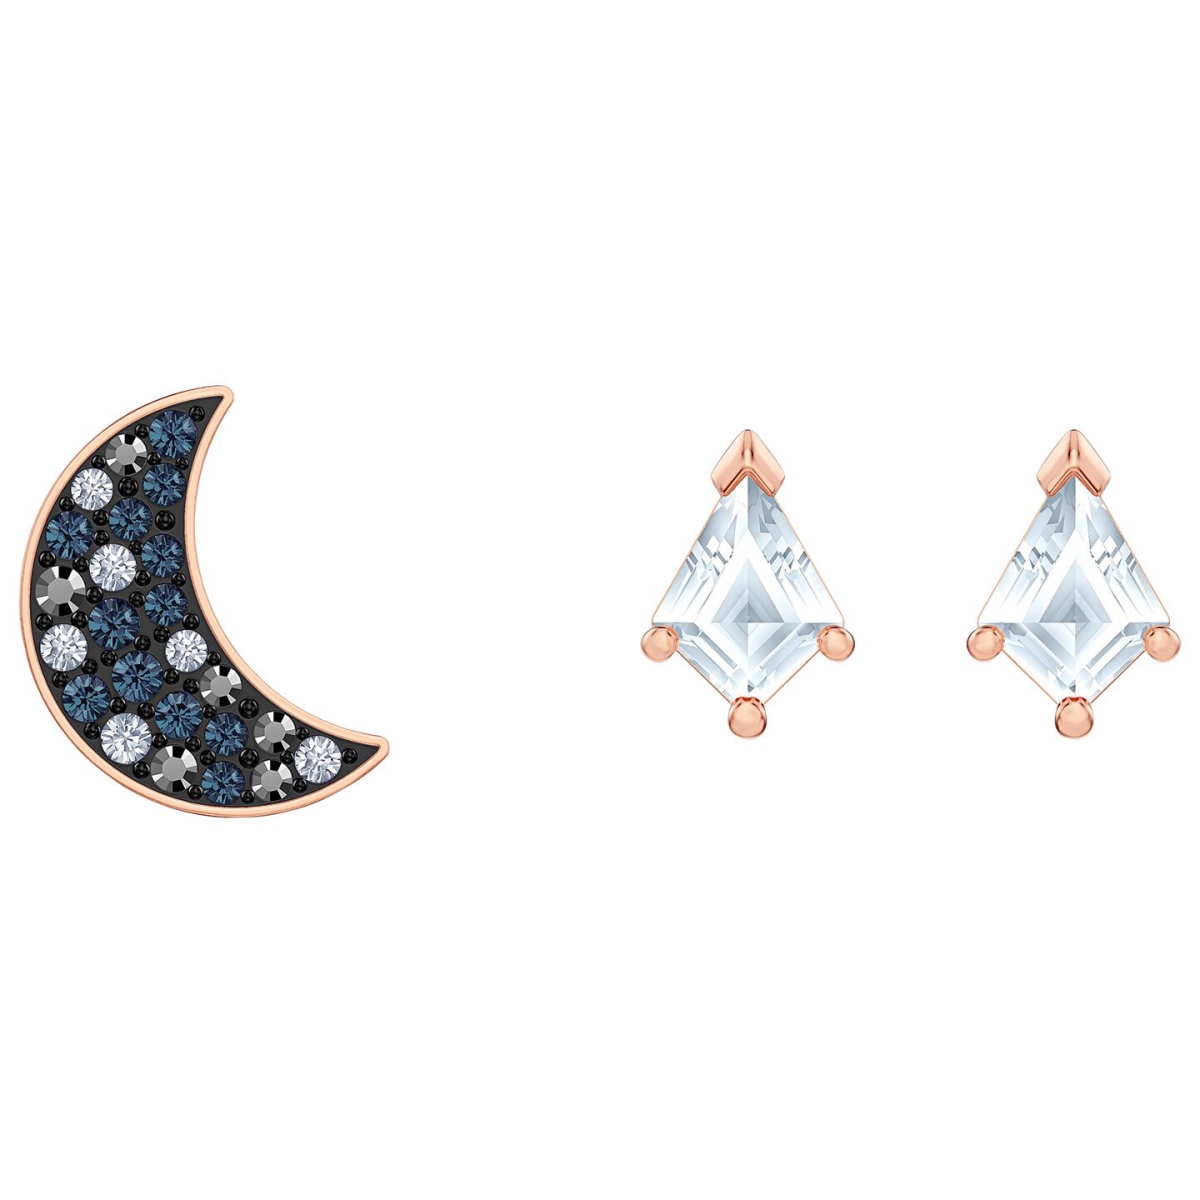 5494353 Symbolic Pierced Earrings Set, Rose-gold Tone Plated - Multi Color